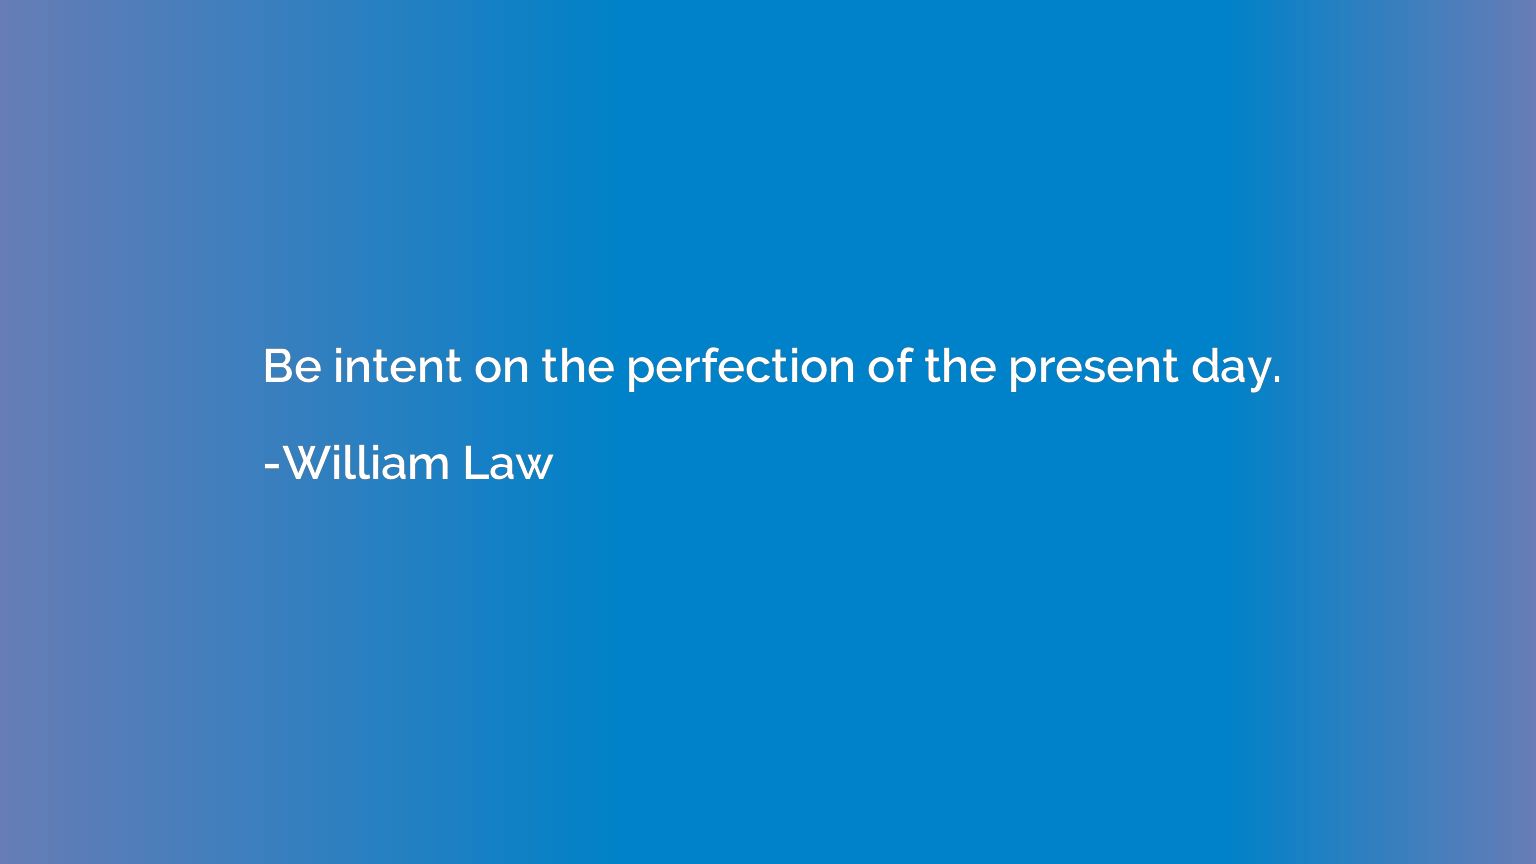 Be intent on the perfection of the present day.